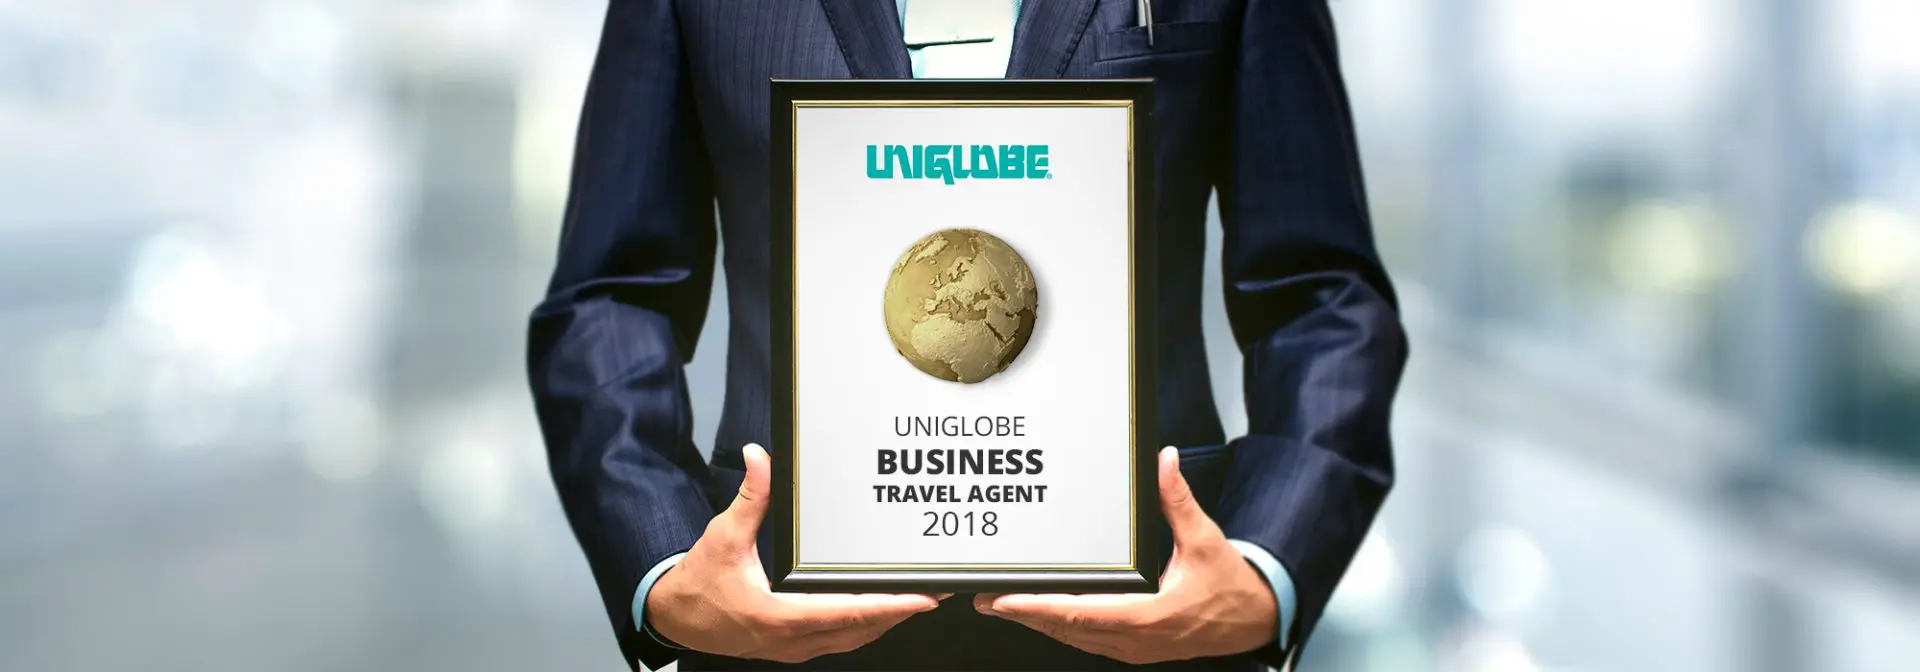 Uniglobe Gemini Announced As Business Travel Agent Of The Year